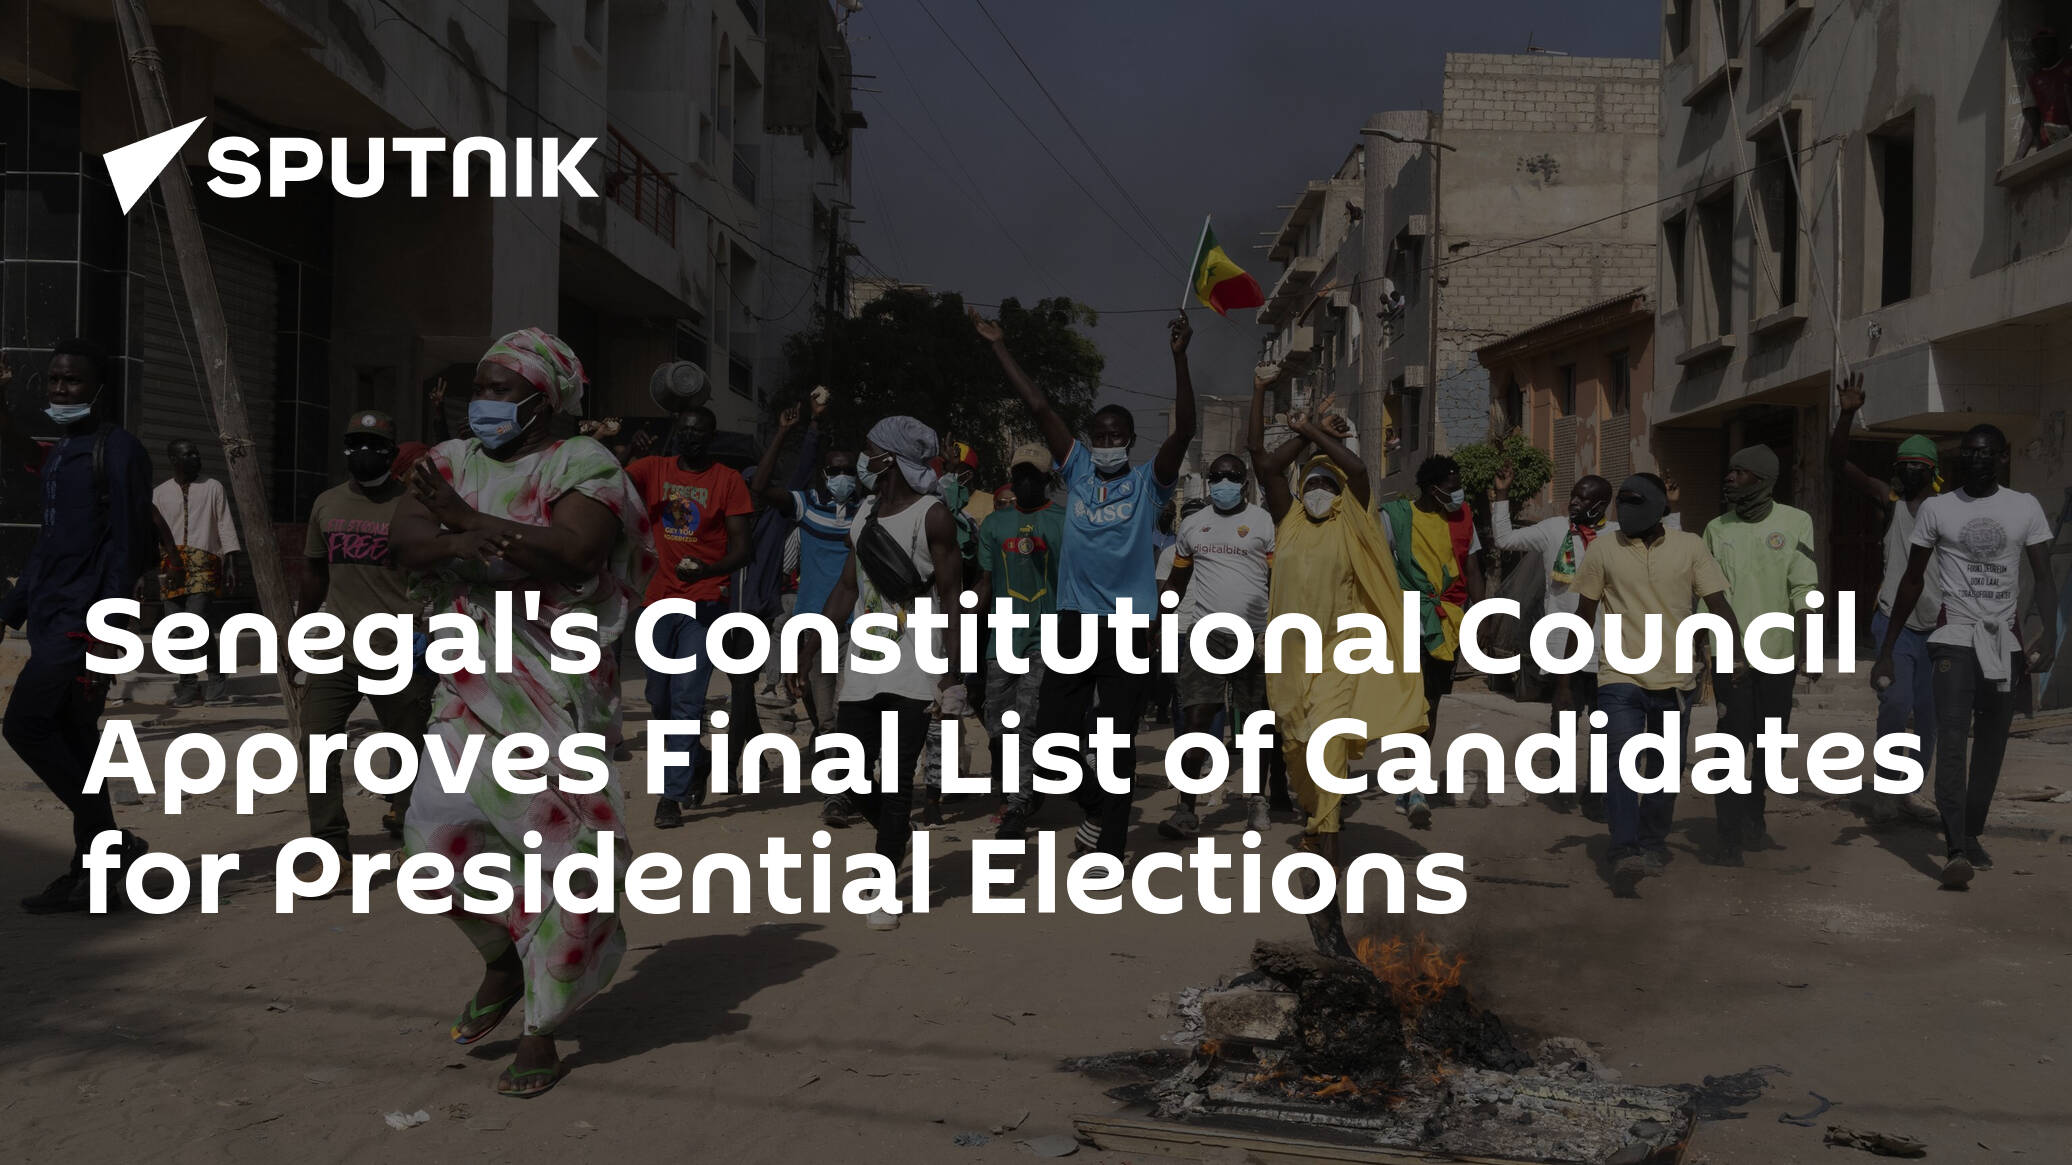 Senegal's Constitutional Council Approves Final List of Candidates for